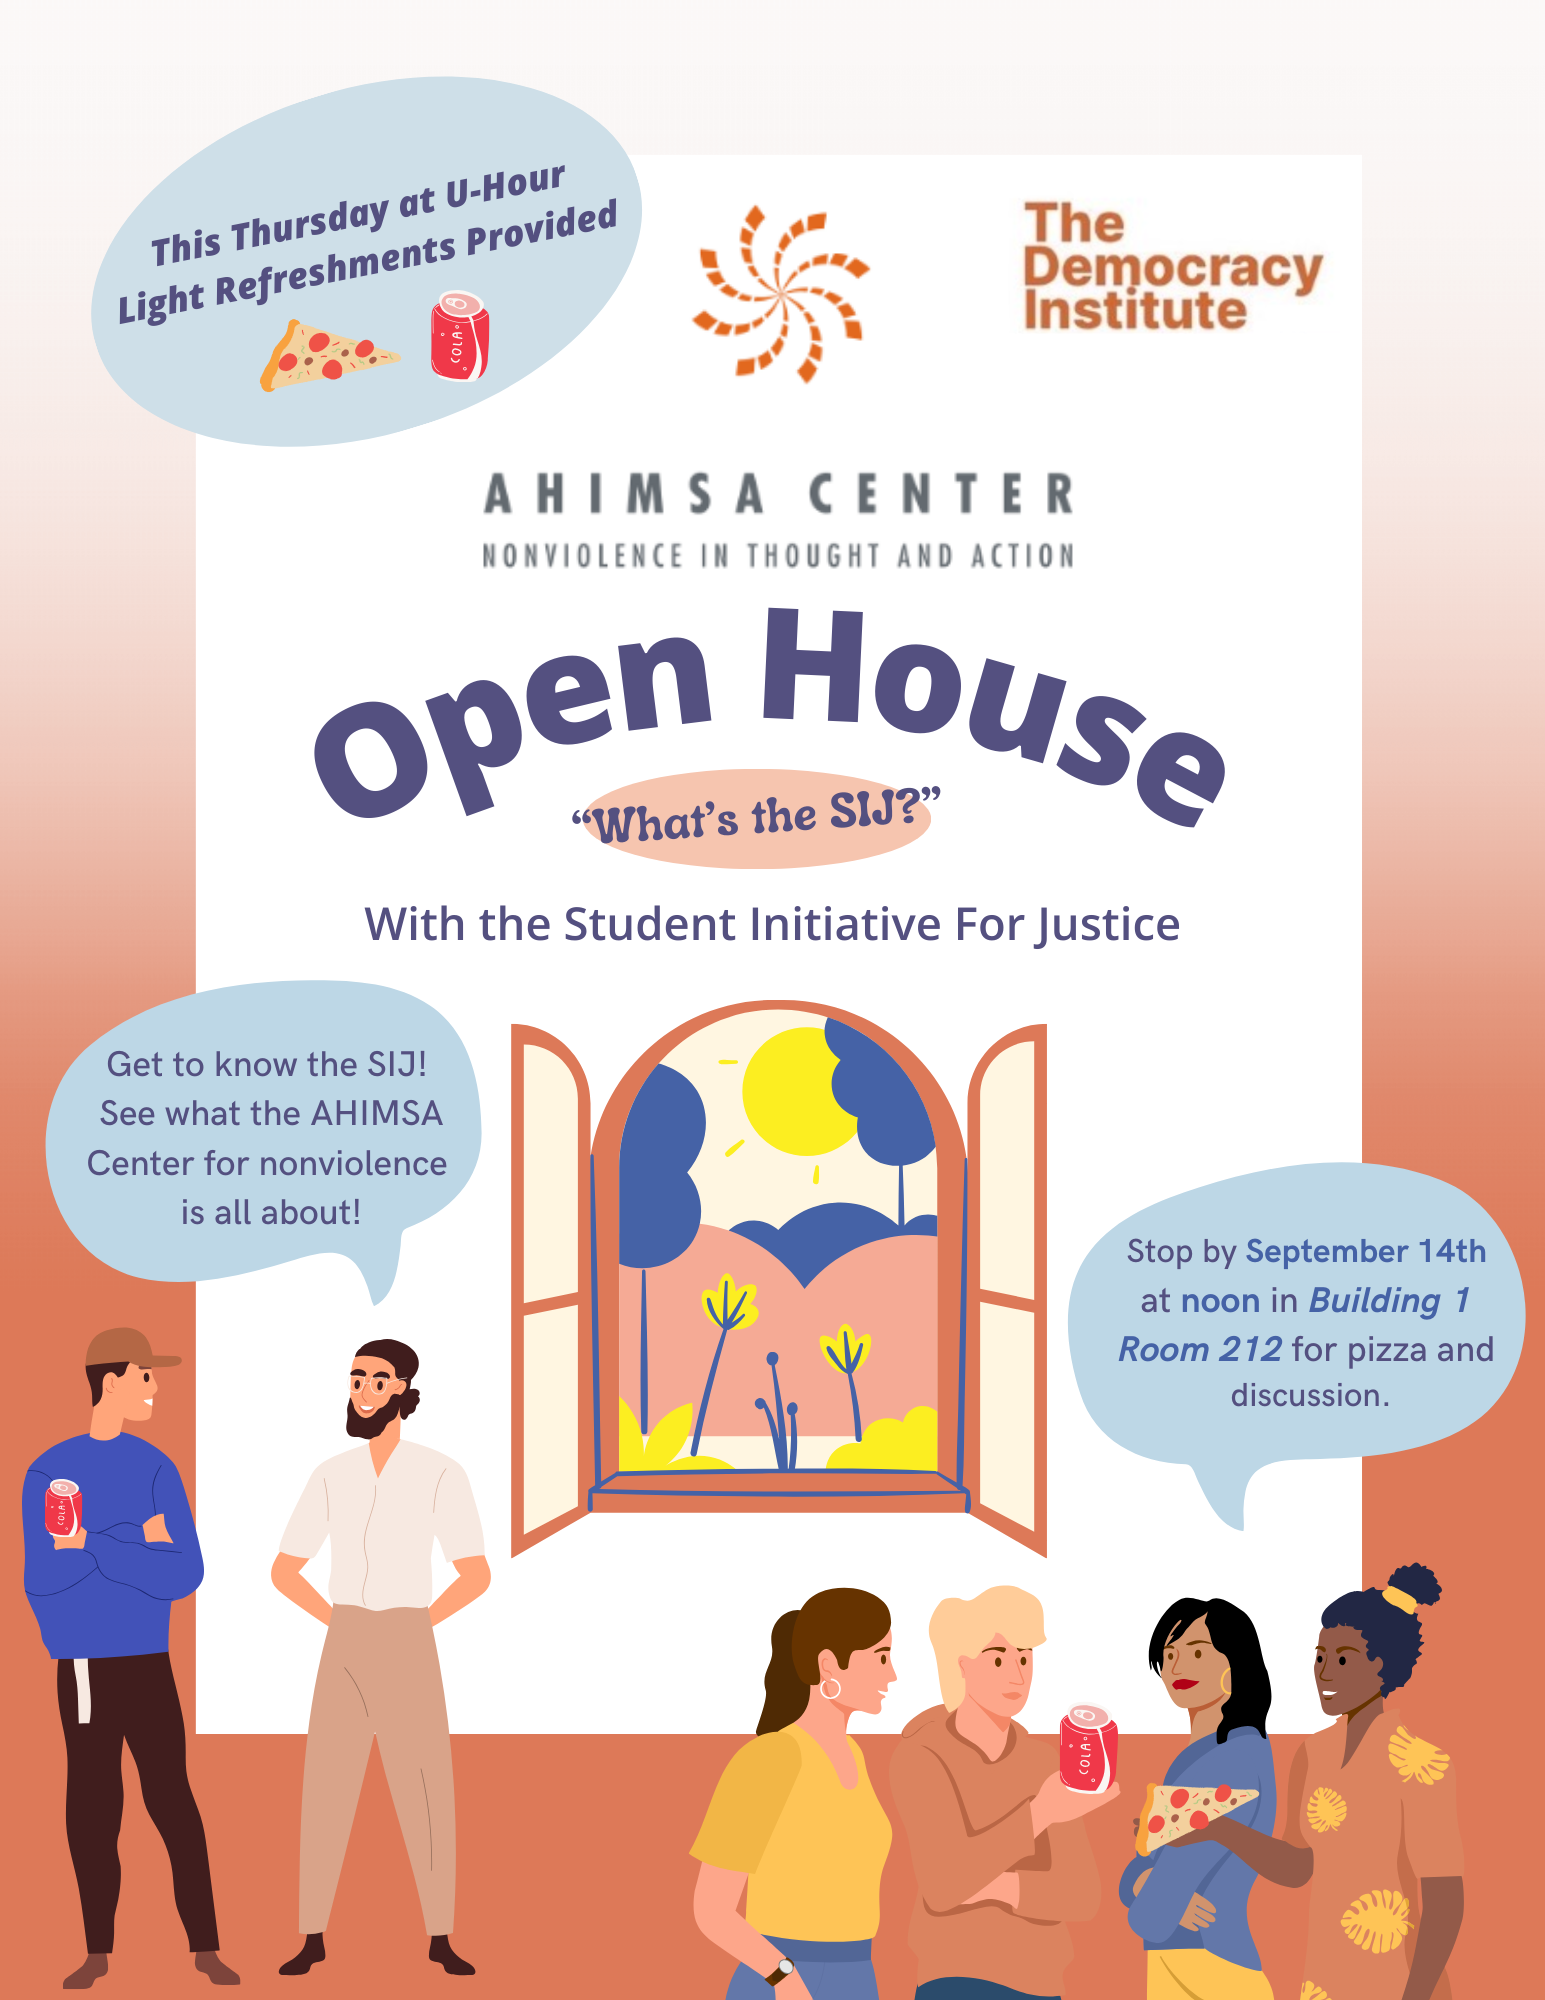 This Thurs U-Hour Light Refreshments Provided.  The Democracy Institute.  Ahimsa Center Nonviolence in Thought and Action. Open House. What is SIJ? What the Student Initiative for Justice. Get to know the SIJ!  See what the AHIMSA Center for nonviolence is all about!  Stop by September 14th at noon in Building 1 Room 212 for pizza and discussion